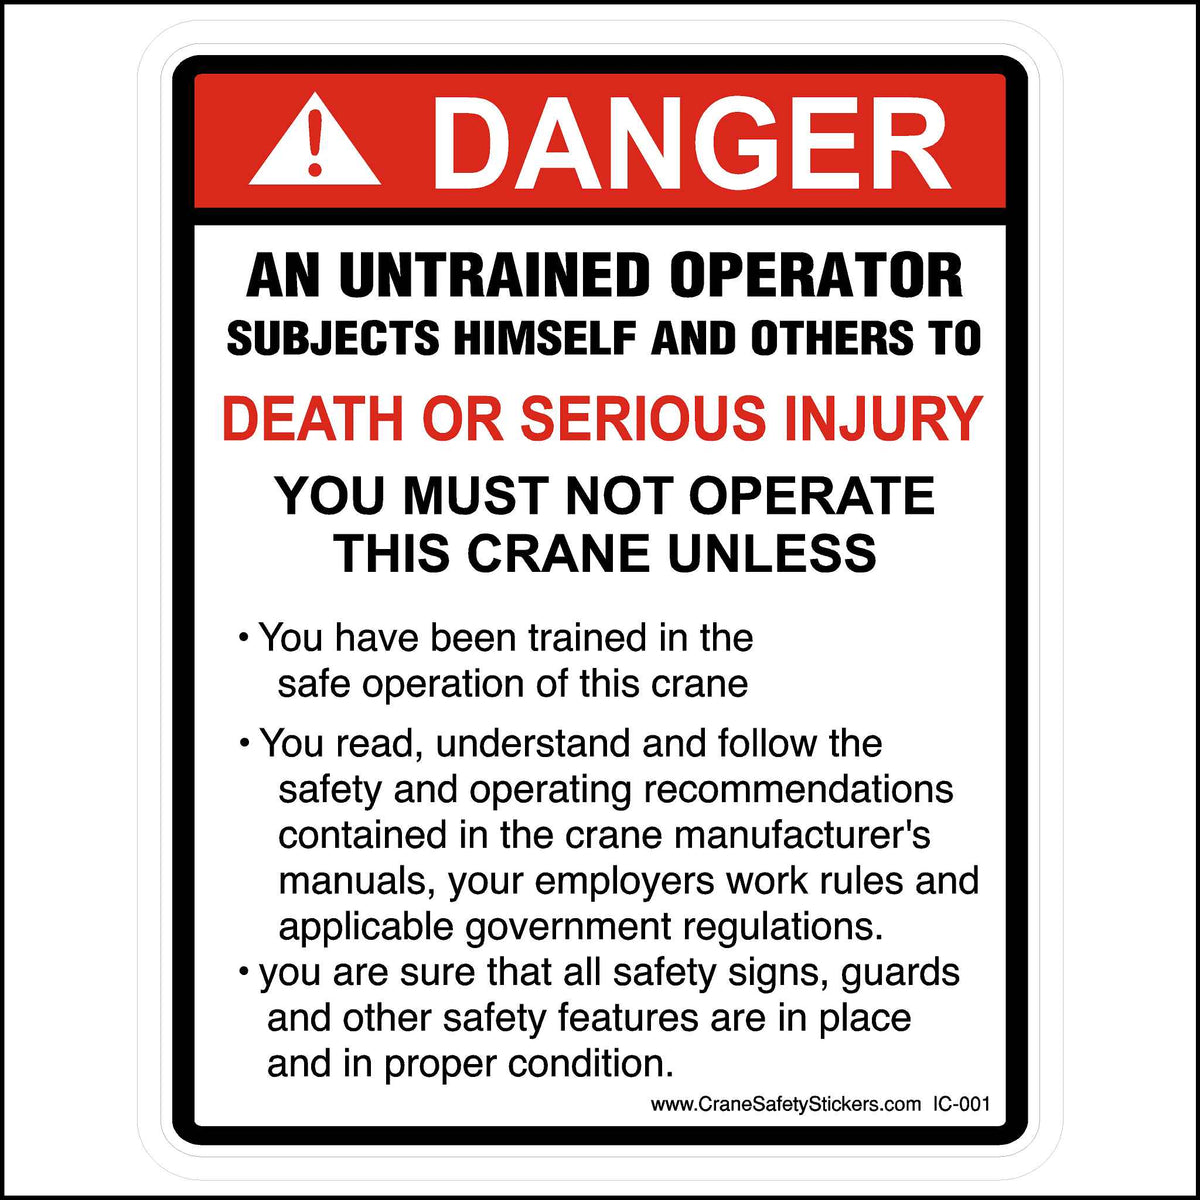 This Untrained Operator Sticker For Cranes and Heavy Equipment Is Printed With. Danger! An untrained operator subjects himself and others to death or serious injury. You Must Not Operate This Crane Unless. • You have been trained in the safe operation of this crane. • You read, understand and follow the safety and operating recommendations contained in the crane manufacturer&#39;s manuals, your employers work rules and applicable government regulations.